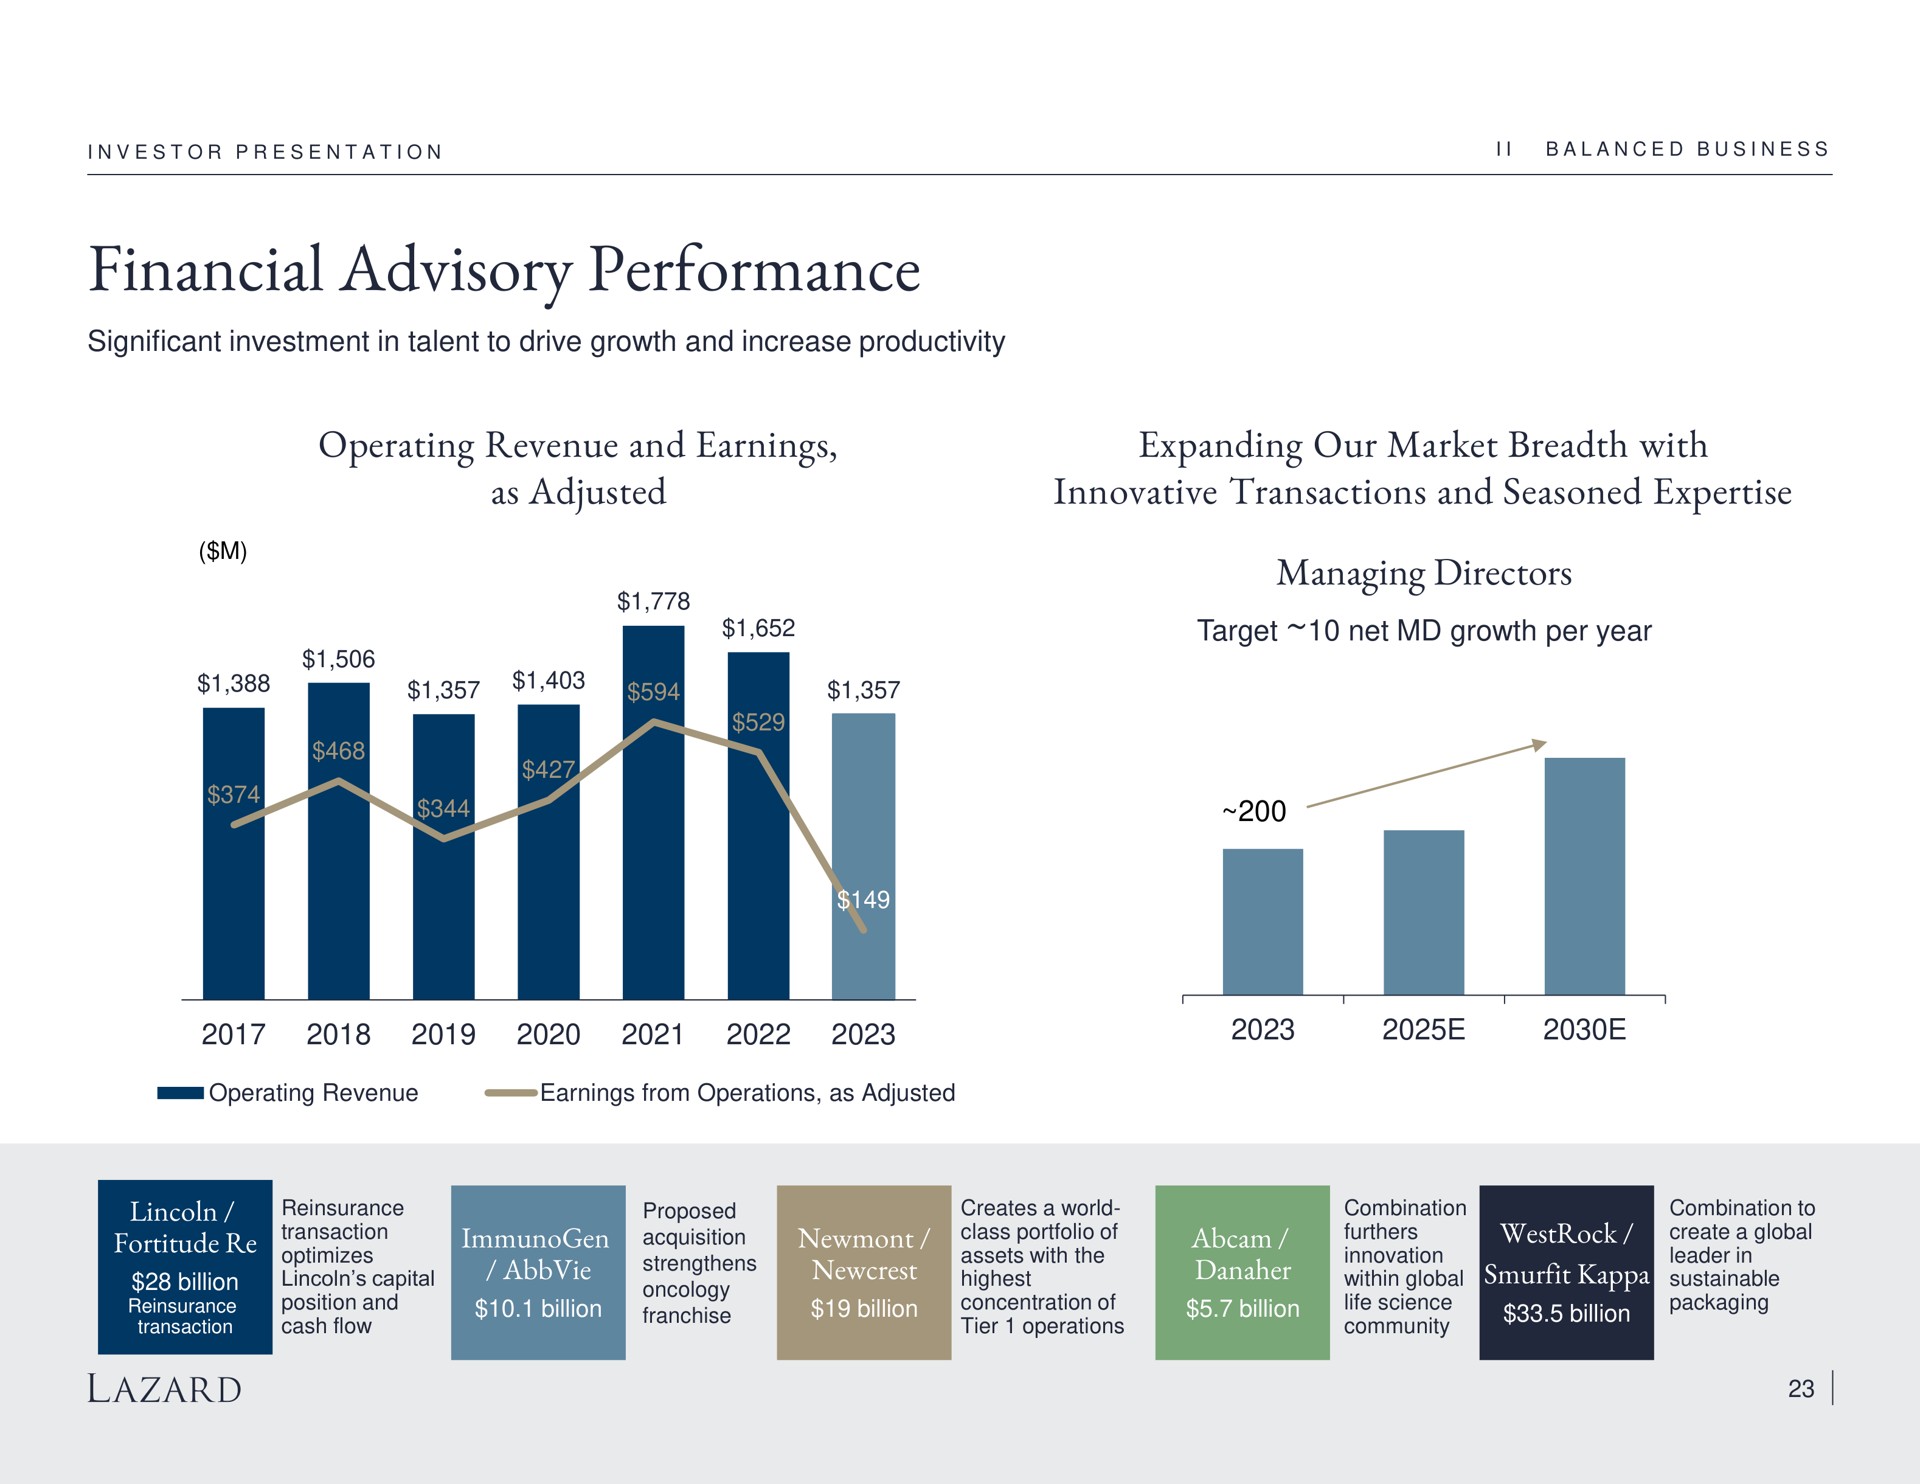 financial advisory performance operating revenue and earnings as adjusted expanding our market breadth with innovative transactions and seasoned managing directors an position rice franchise life science packaging | Lazard